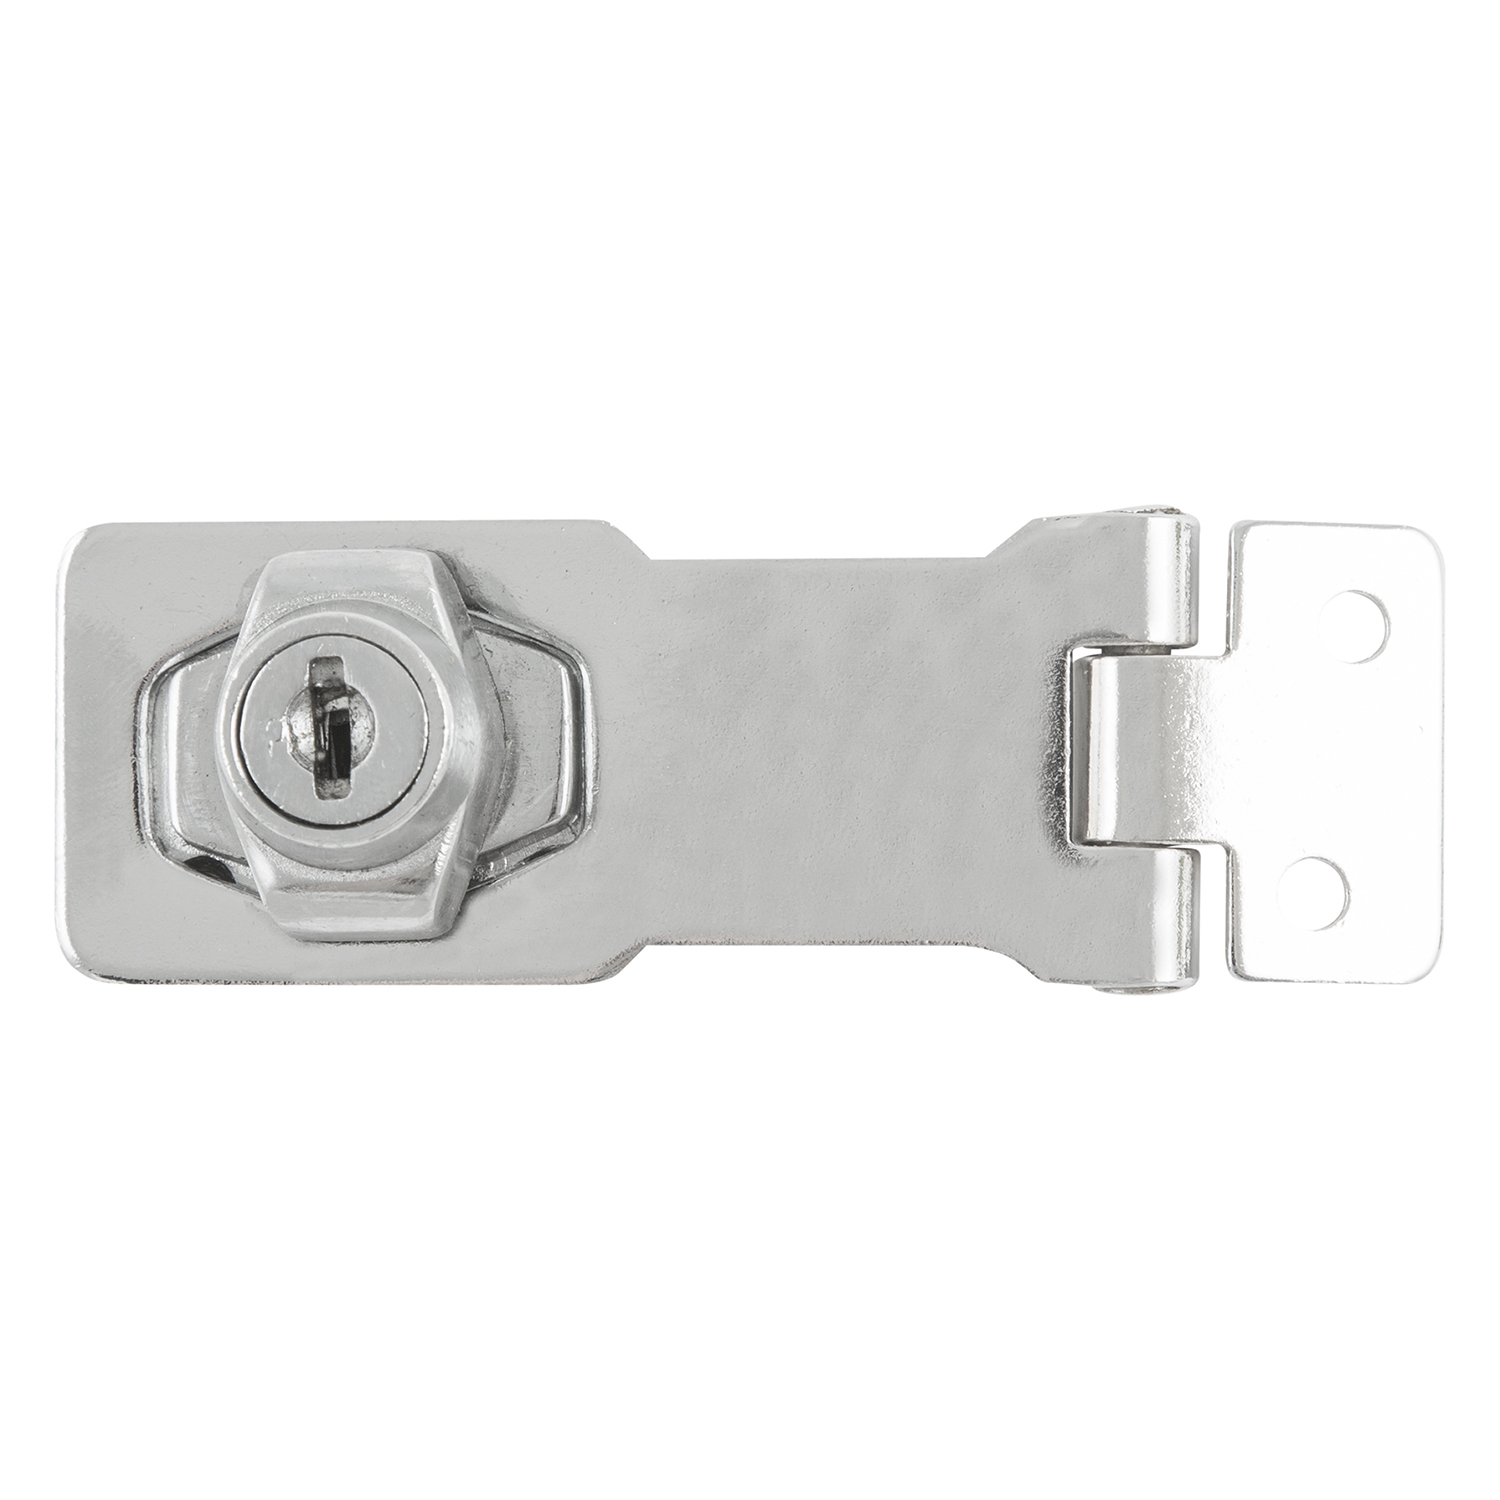 Hiatt 75mm Shed and Gate Locking Hasp and Staple Image 2